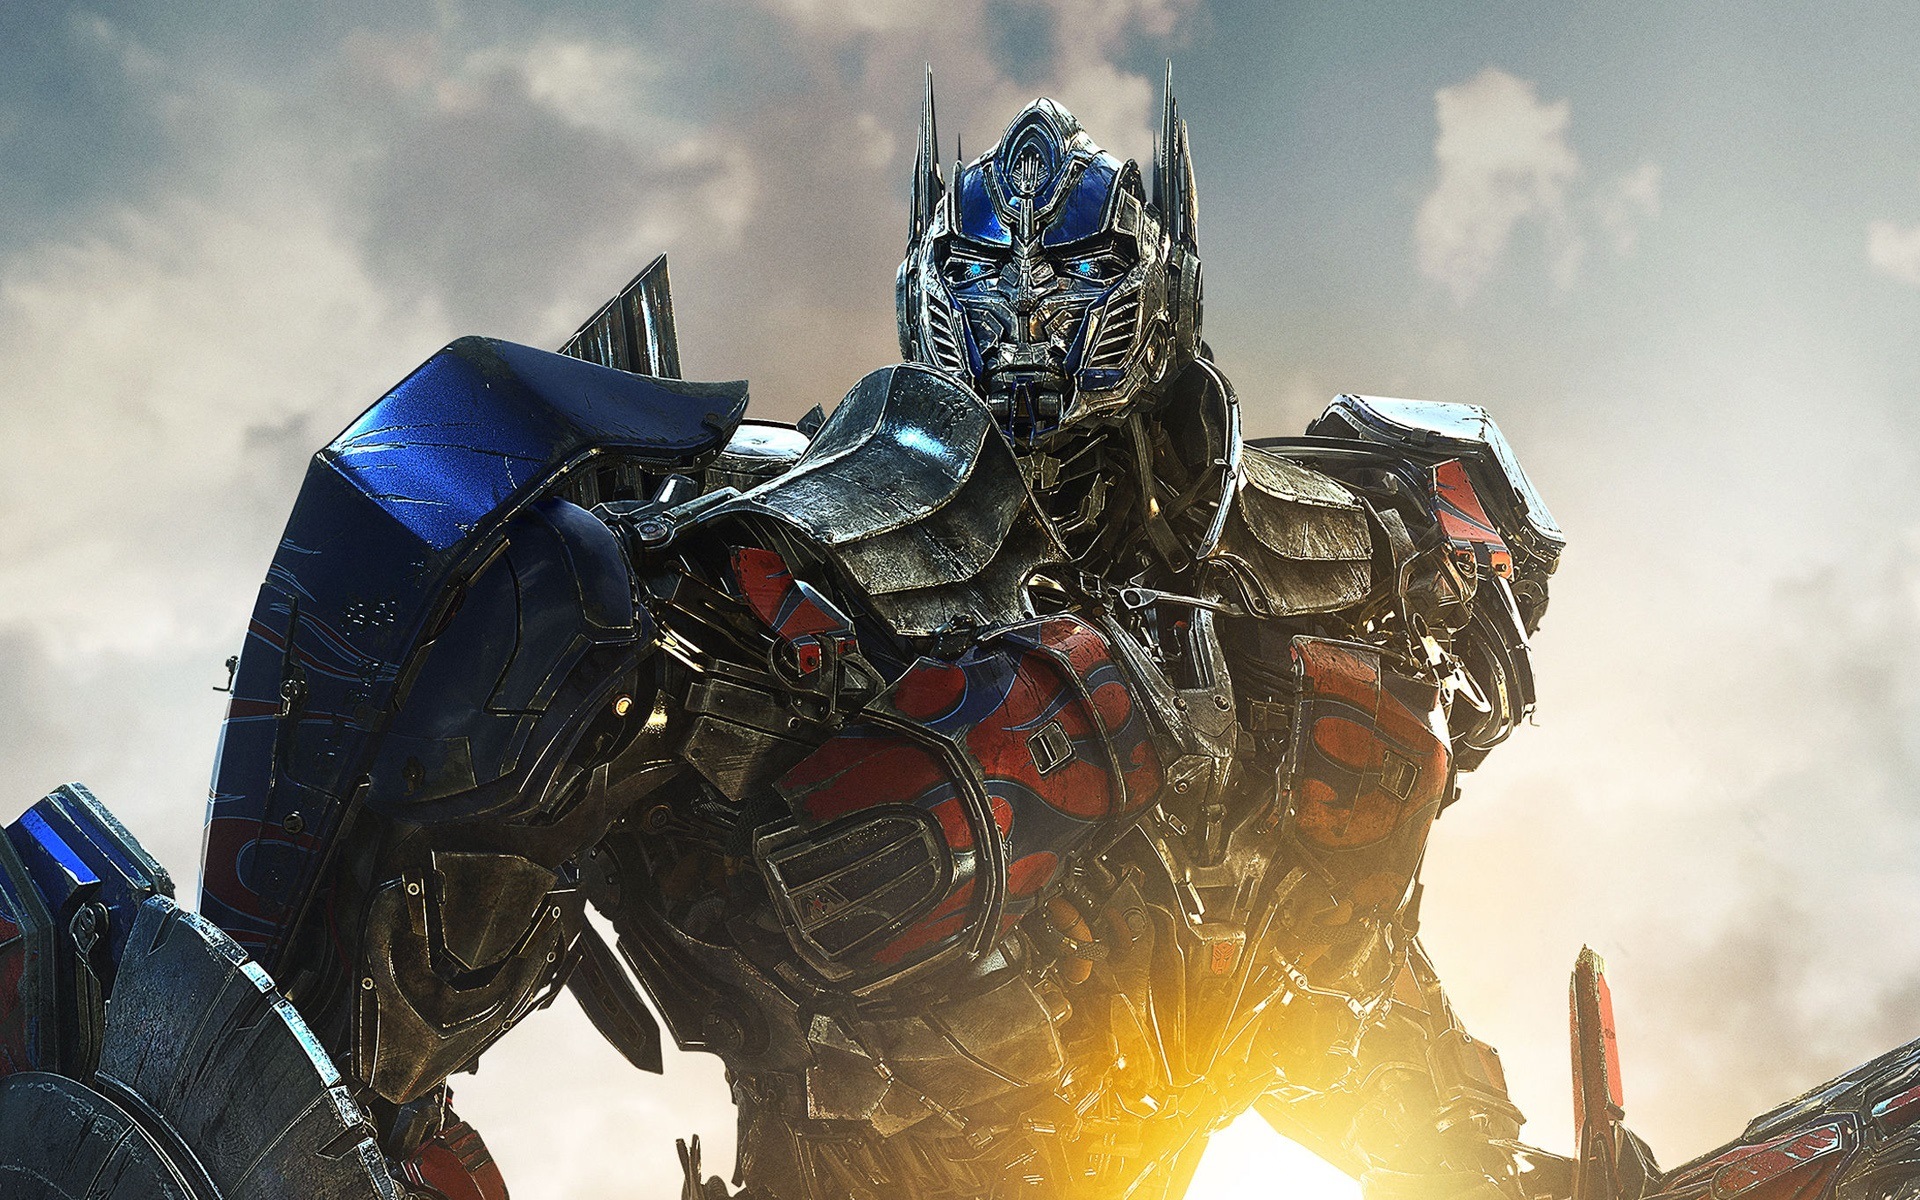 2014 Transformers: Age of Extinction HD wallpapers #2 - 1920x1200